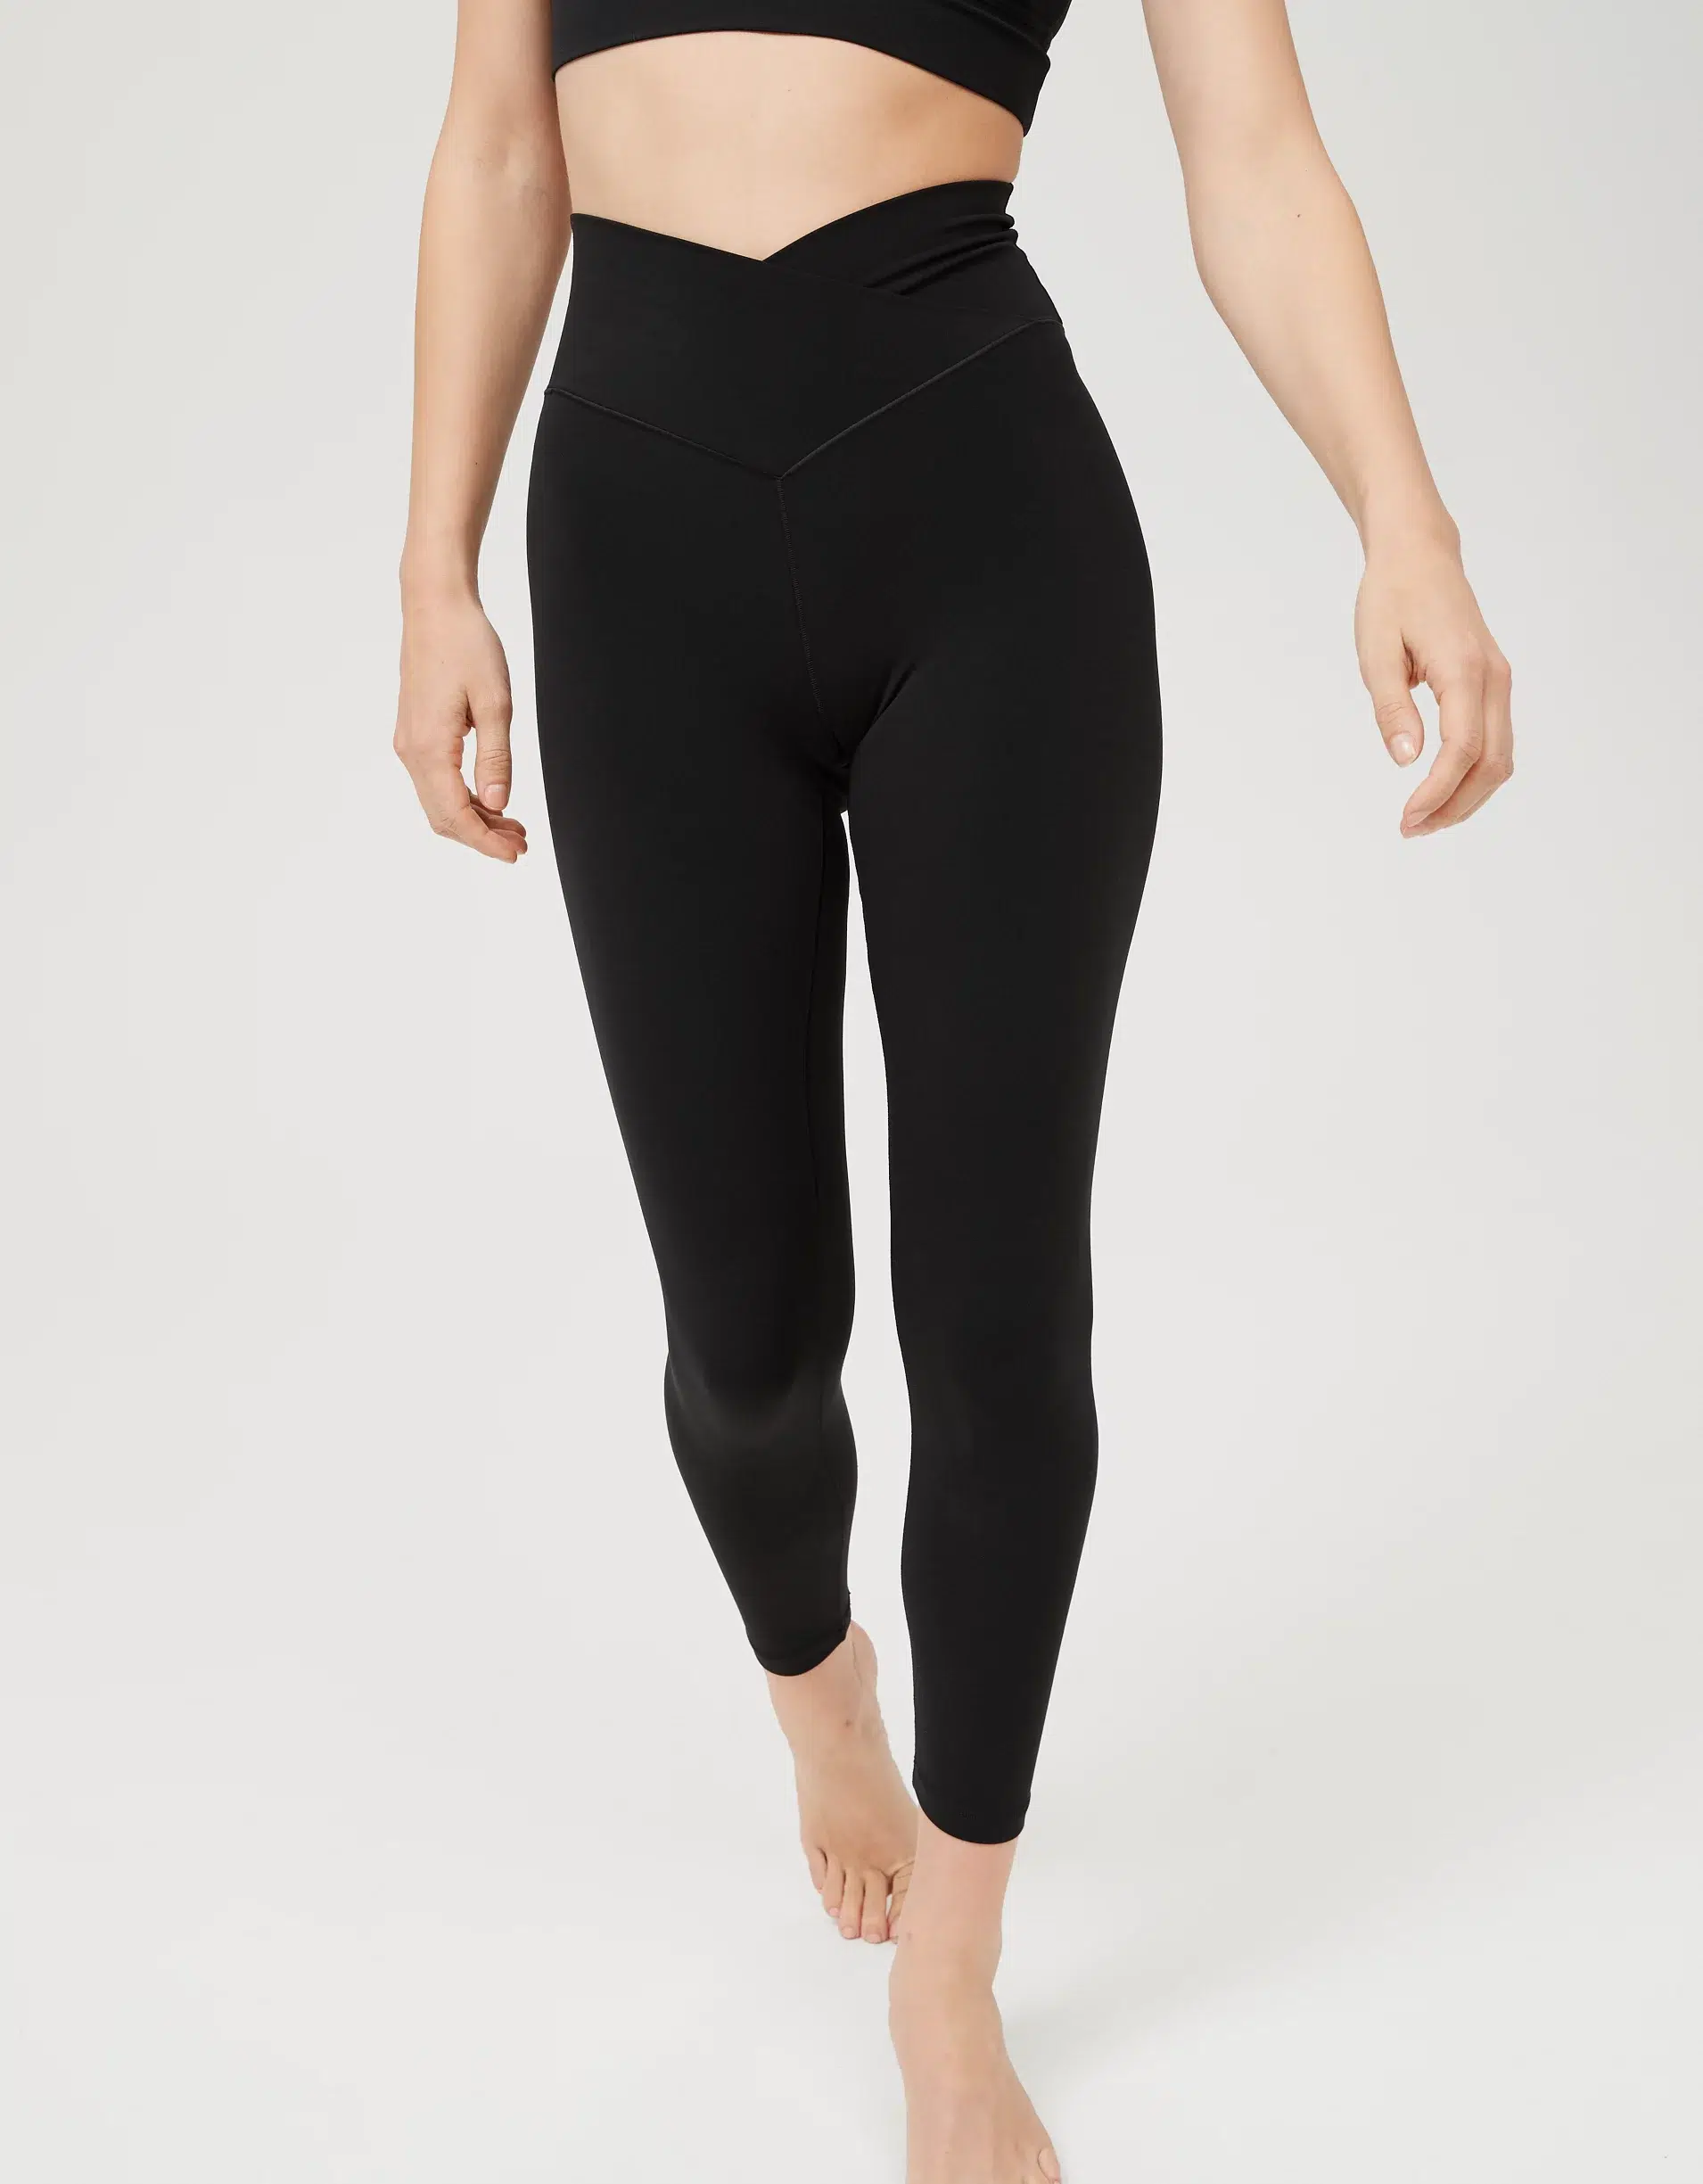 2. OFFLINE By Aerie Real Me High Waisted Crossover Legging